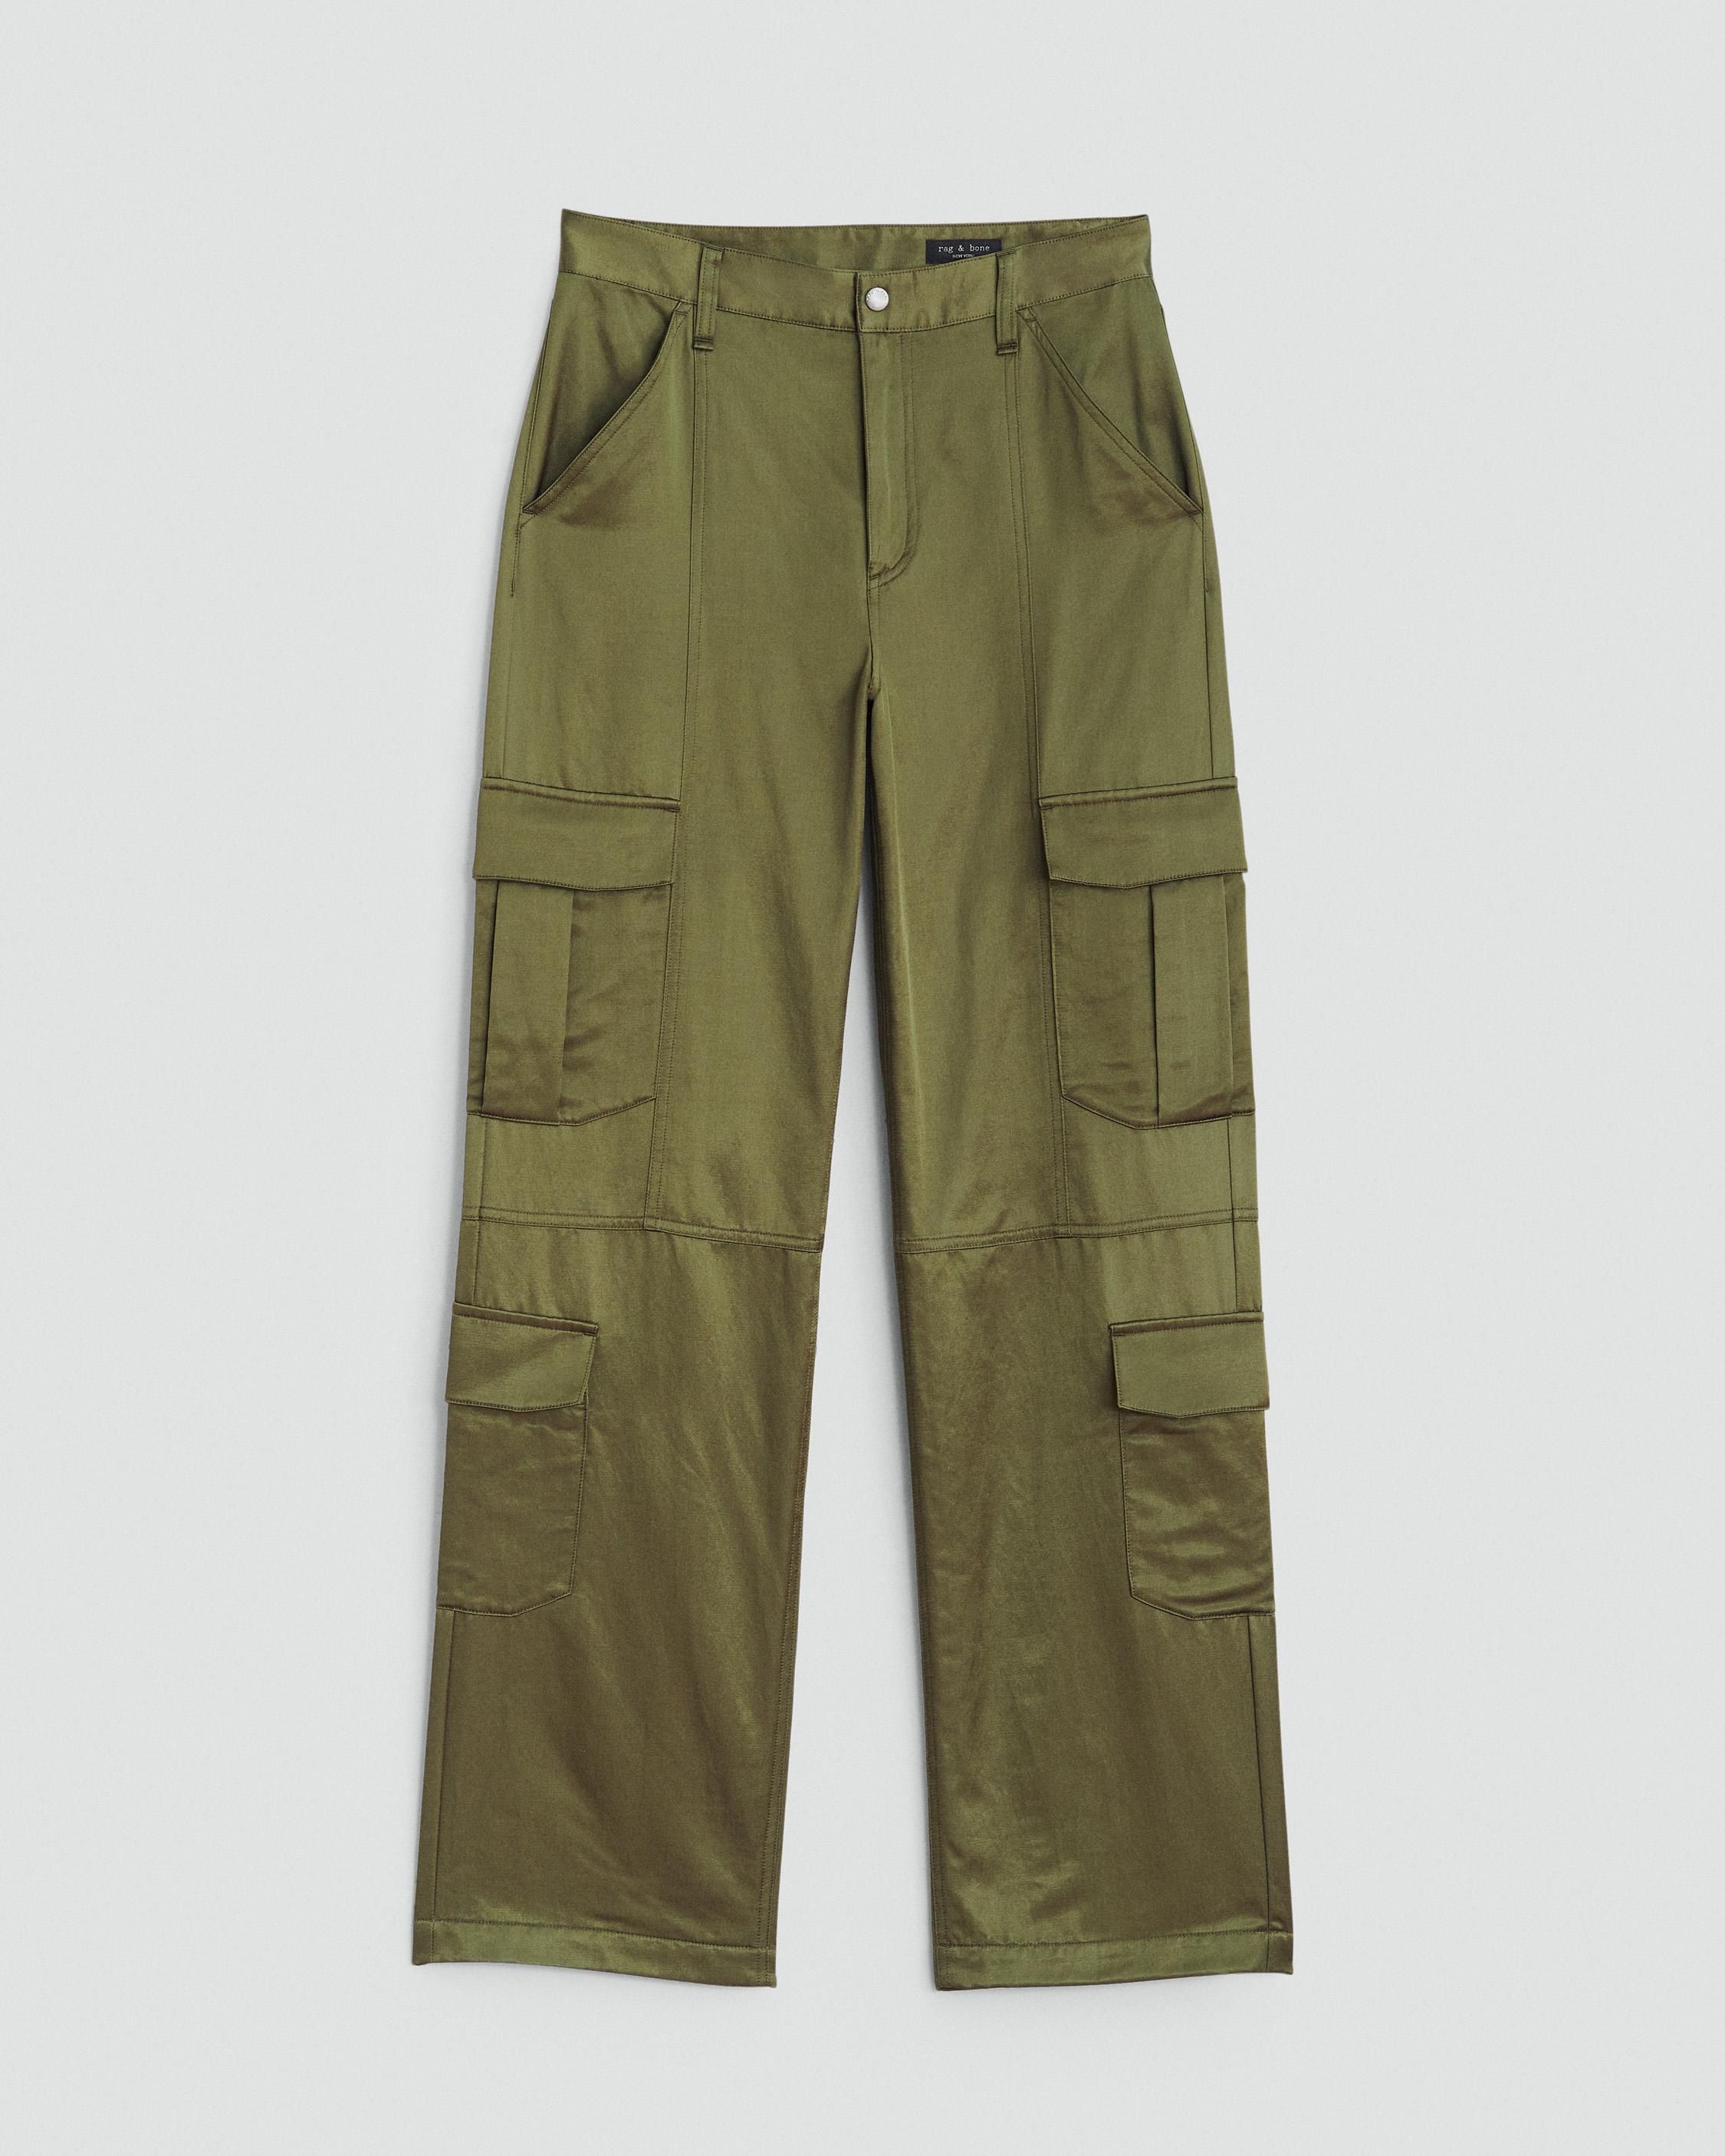 Cailyn Japanese Satin Cargo Pant
Relaxed Fit - 1